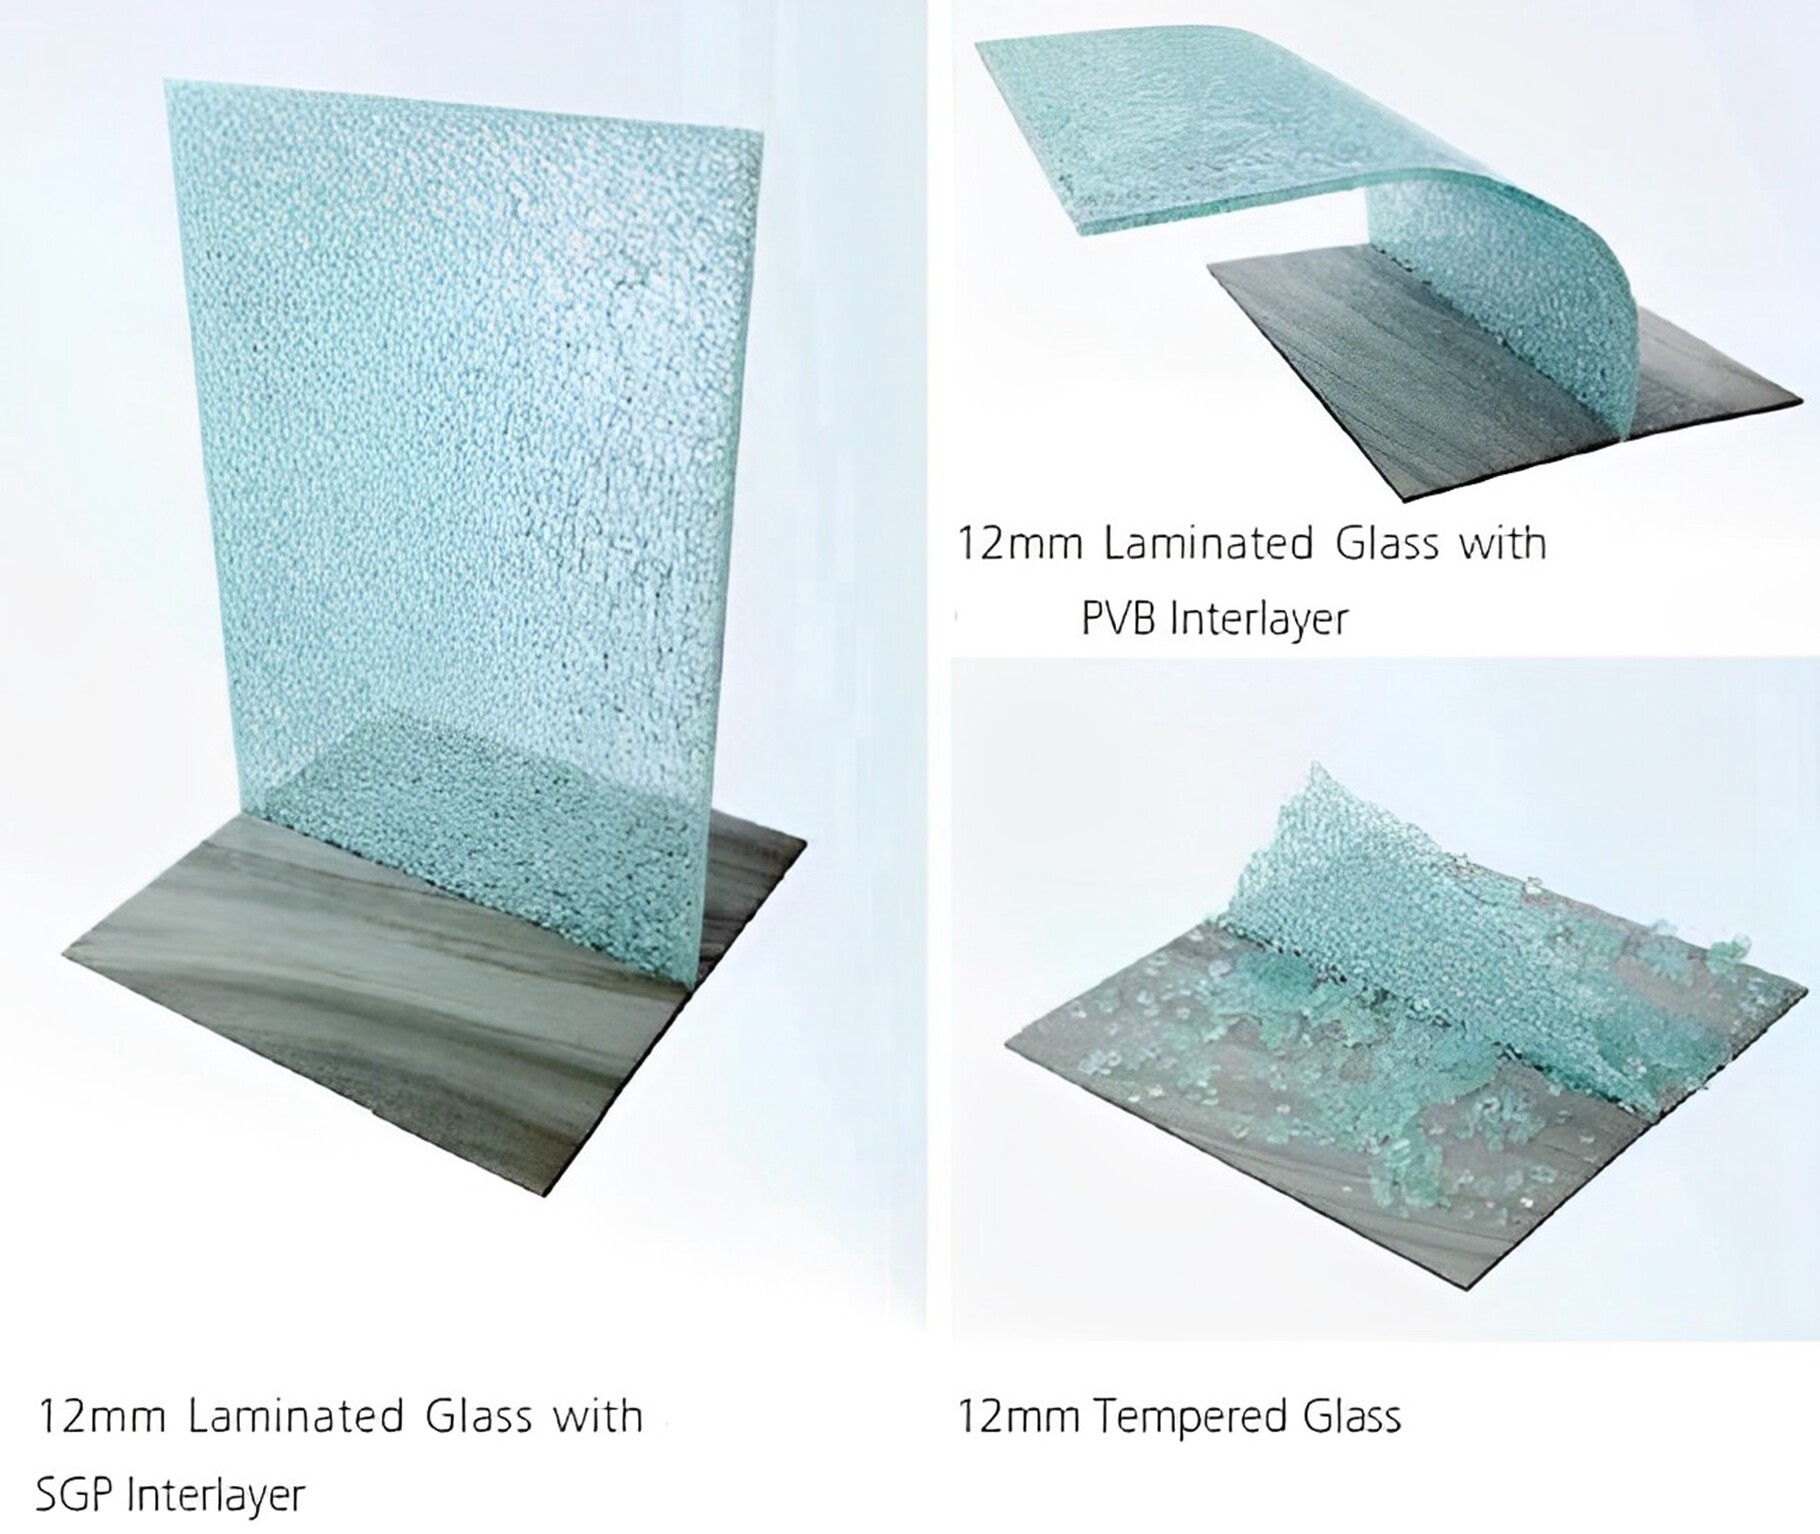 tempered glass vs PVB SGP laminated glass with glass broken test